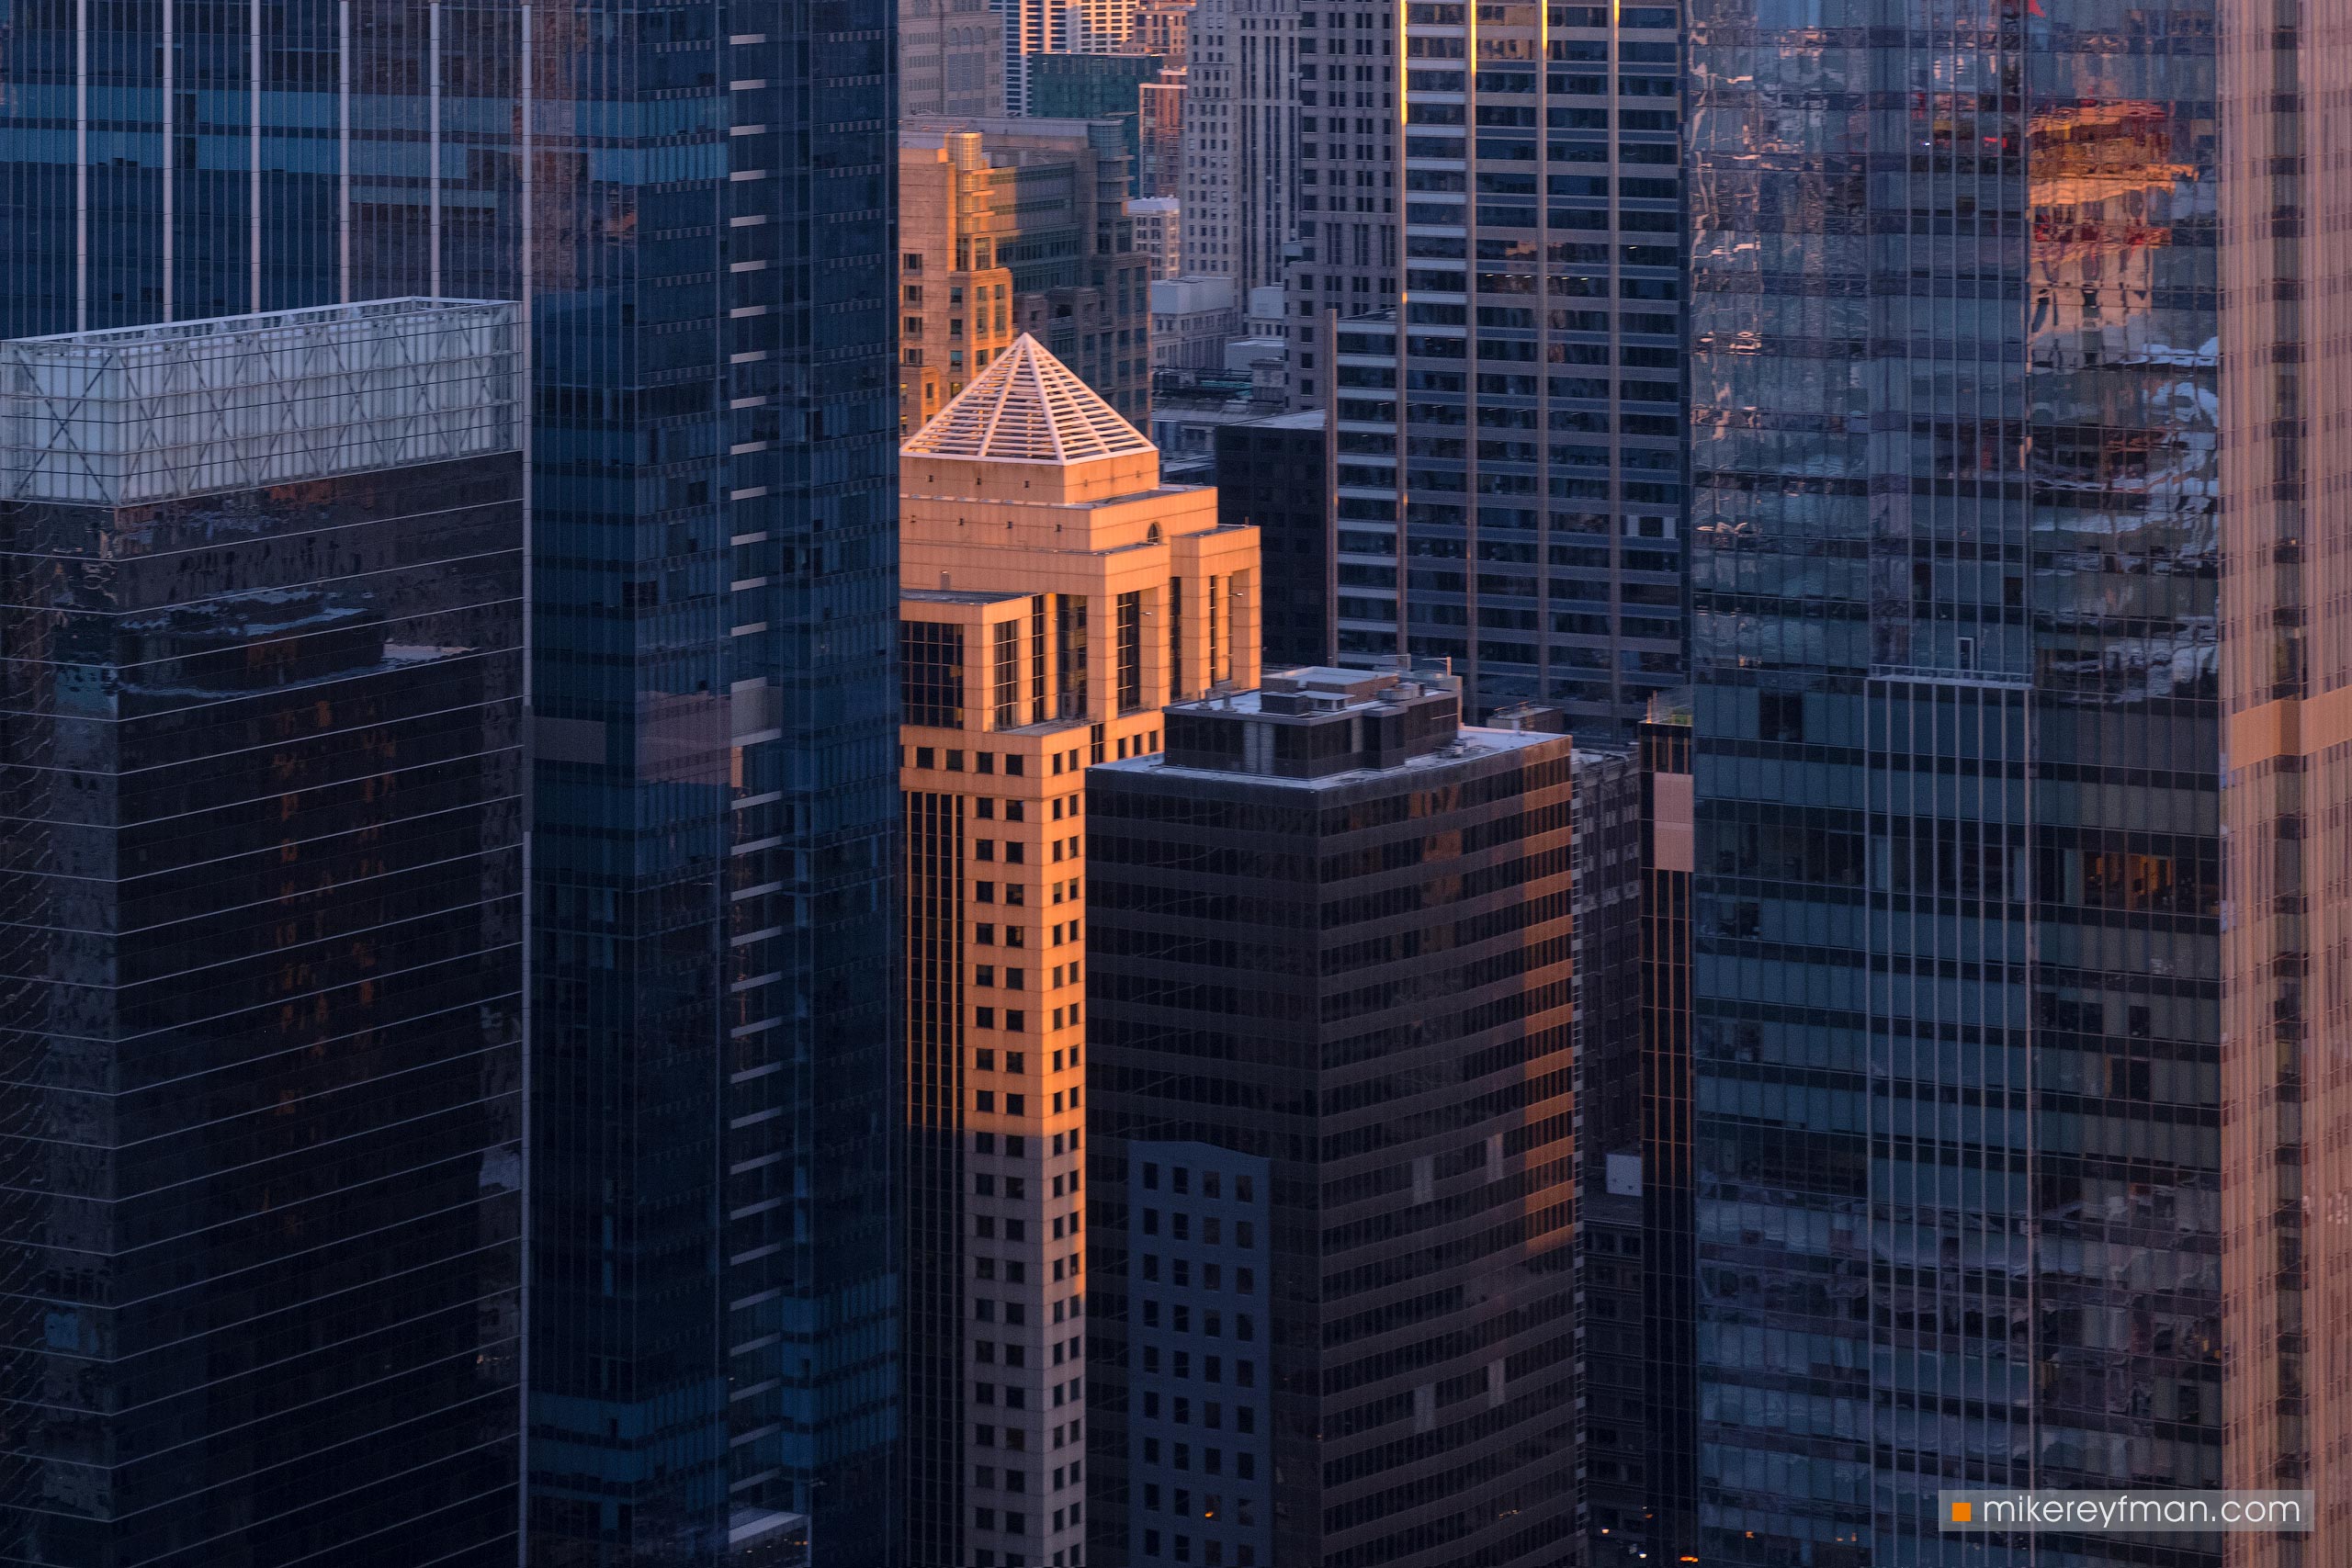 City from above - Chicago, Illinois, USA. Aerial view in the evening. 060-CH-2_ZRA10070 - Ever-beating architectural heart of America. The birthplace of the most iconic buildings in the country. - Mike Reyfman Photography